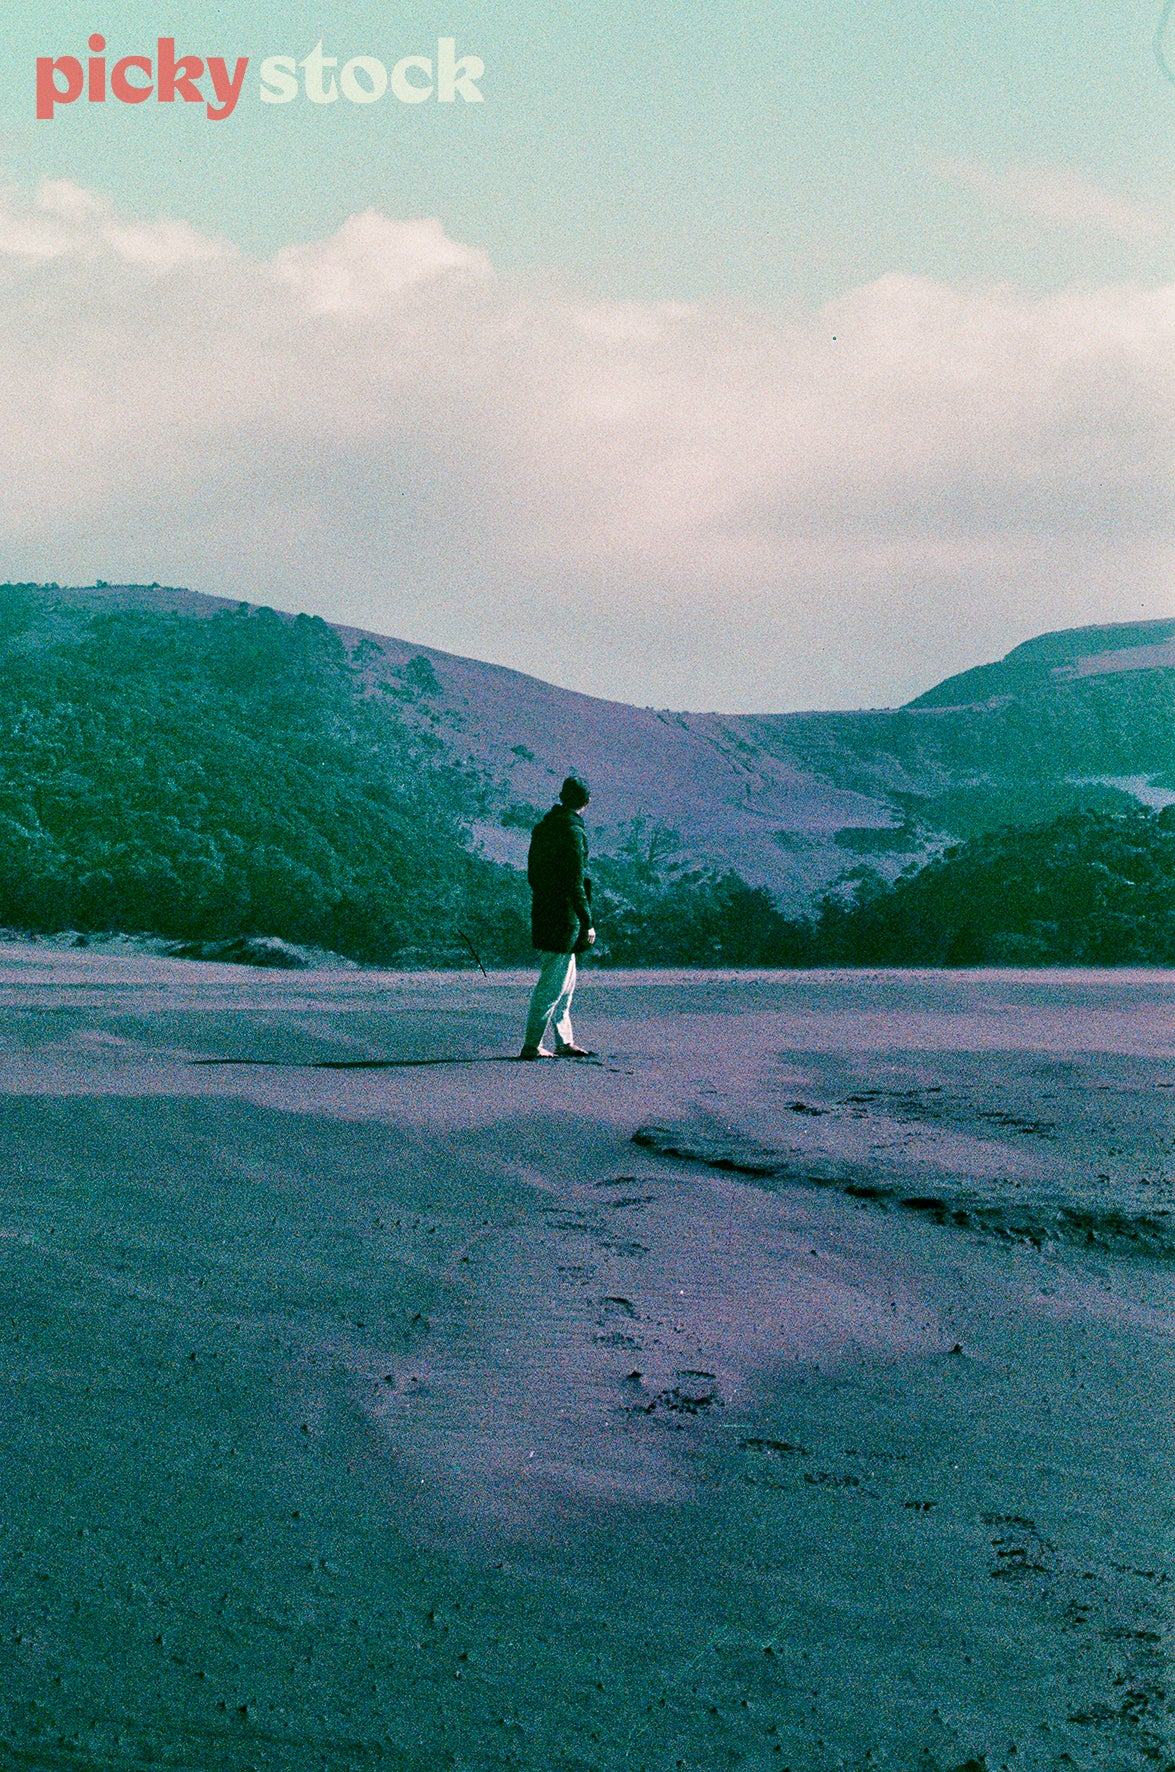 Film saturated image of man wearing beanie standing in sand looking out to mountains, Image has a blue grade across image